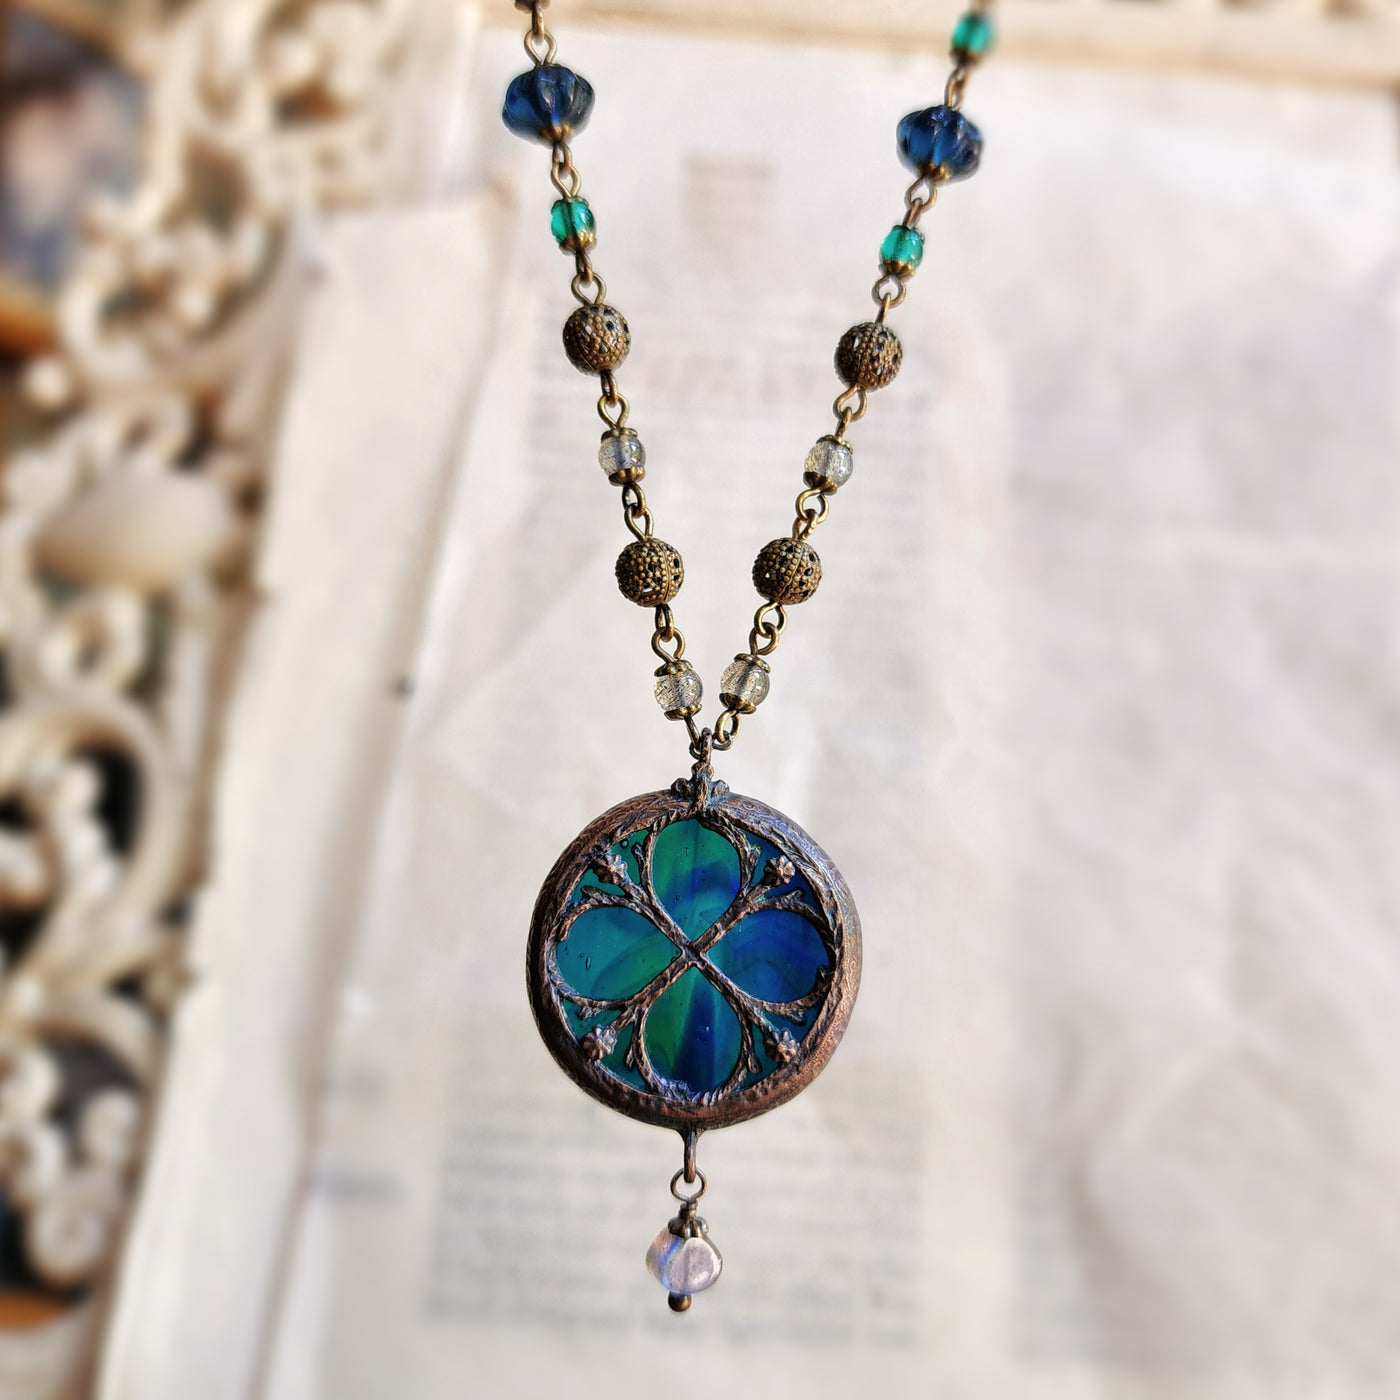 depths of the sea - floriated clover miracle window amulet